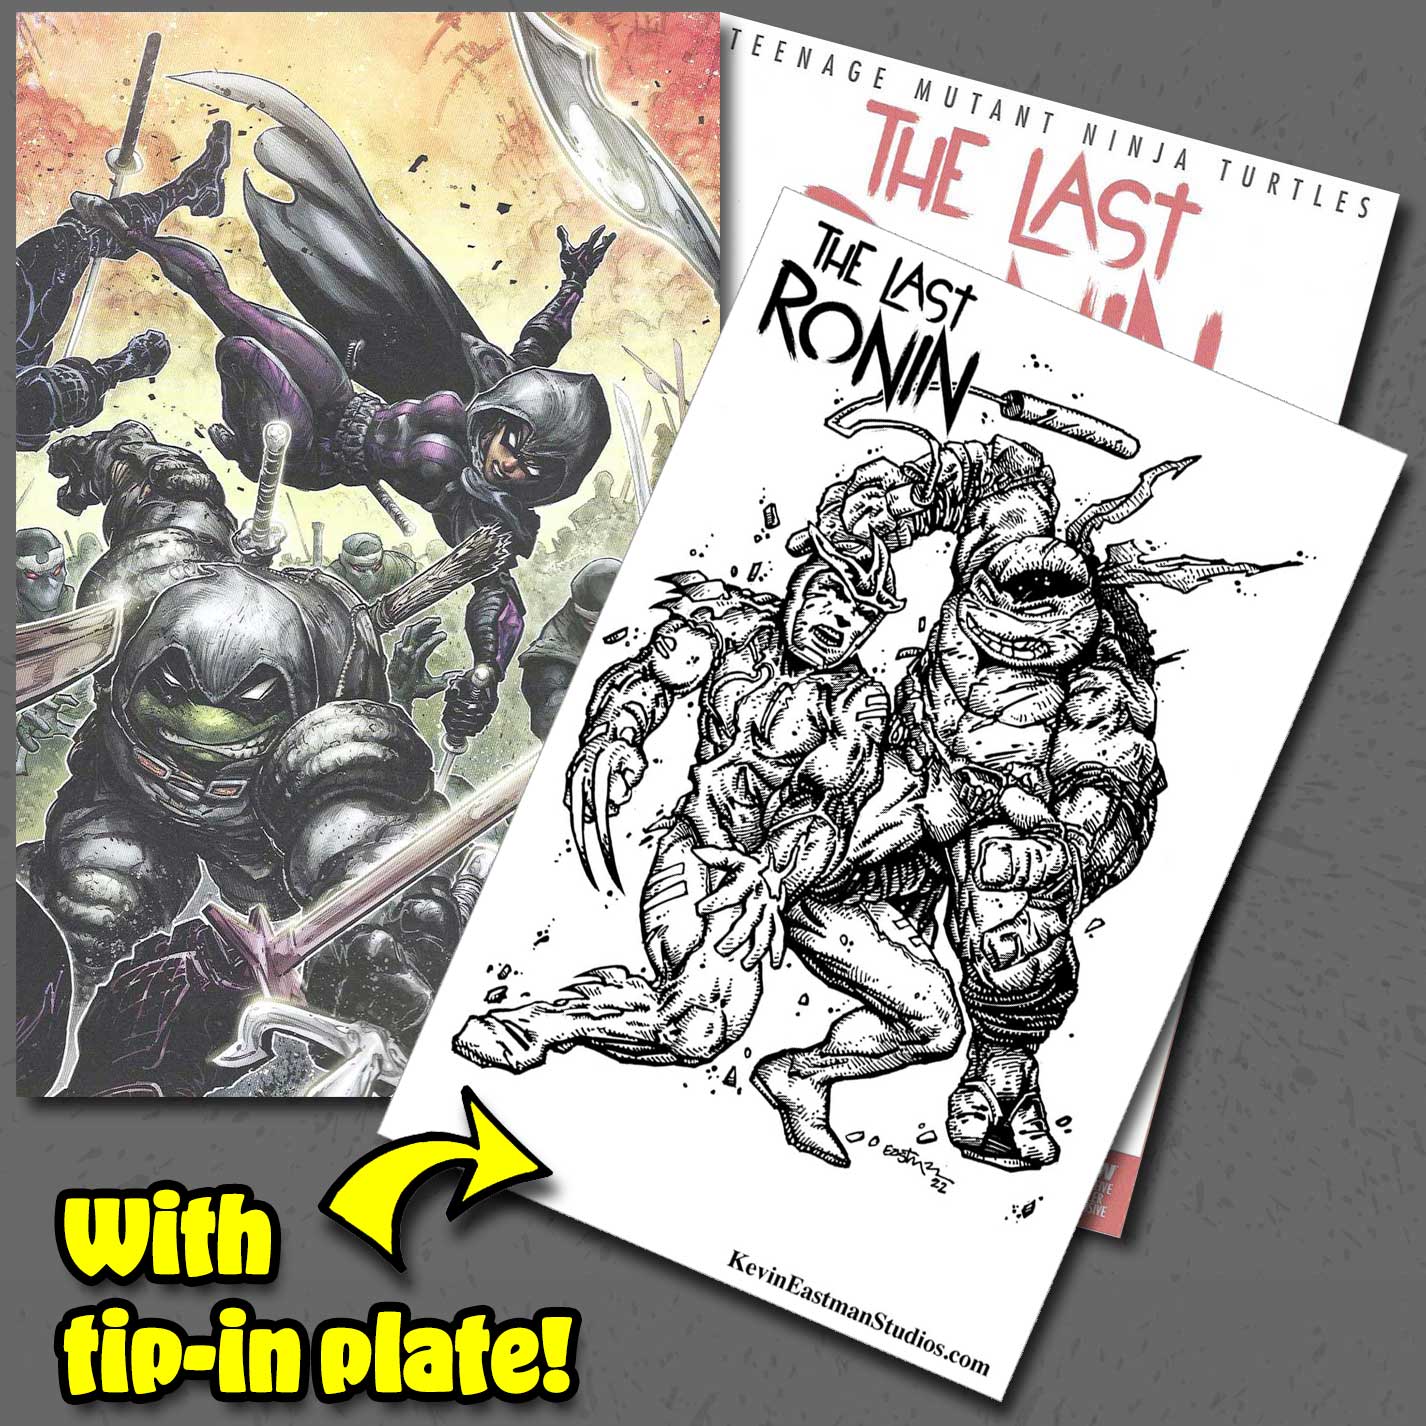 The Last Ronin issue 5, Eastman Studios Exclusive Williams/Eastman Variant Cover